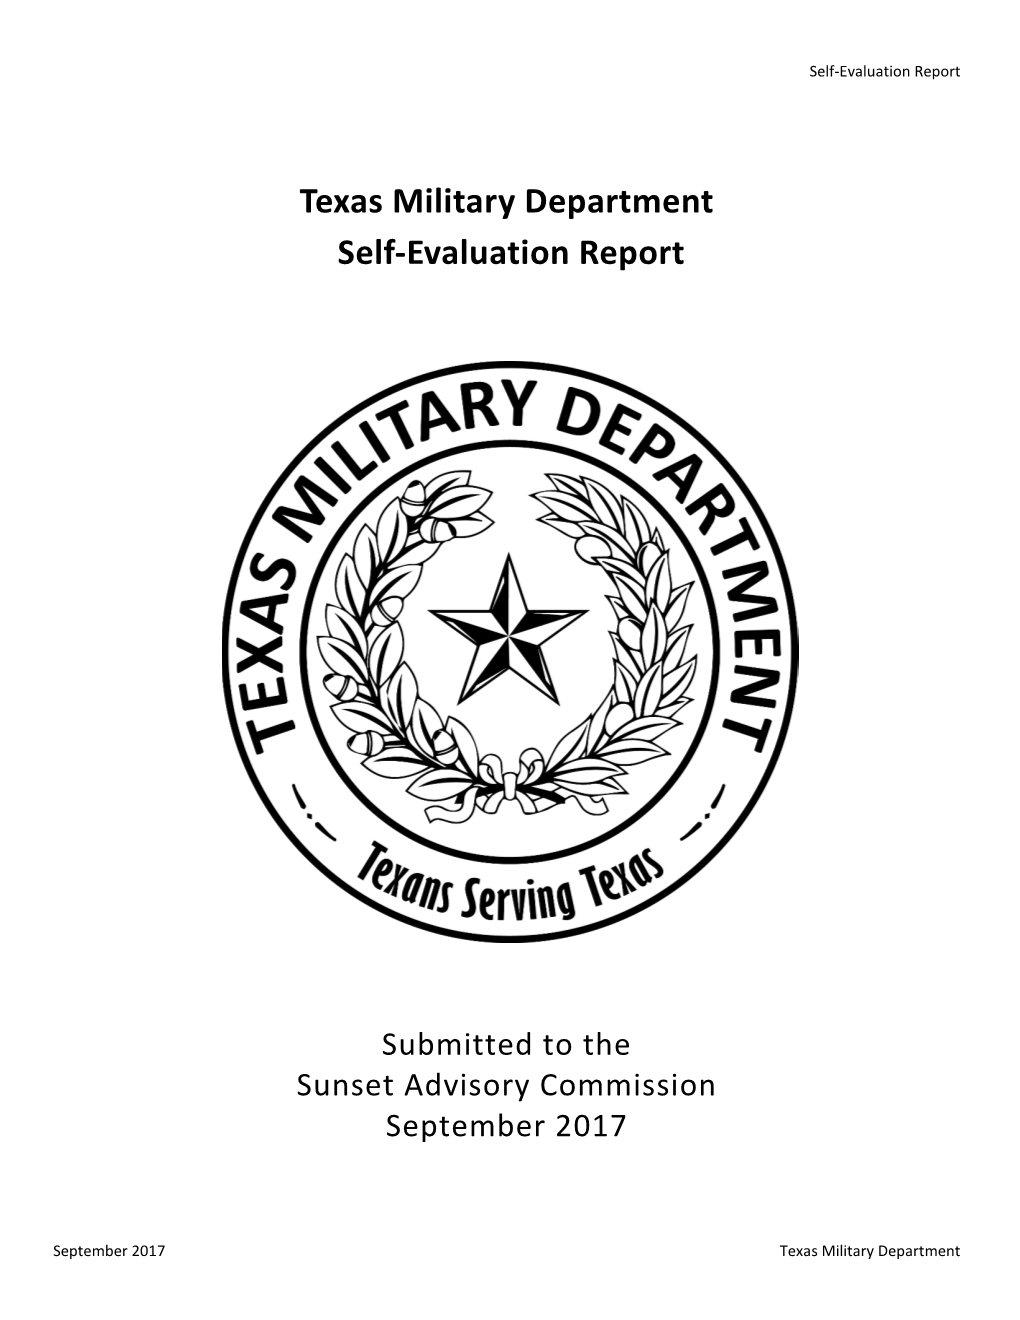 Texas Military Department Sunset Self-Evaluation Report